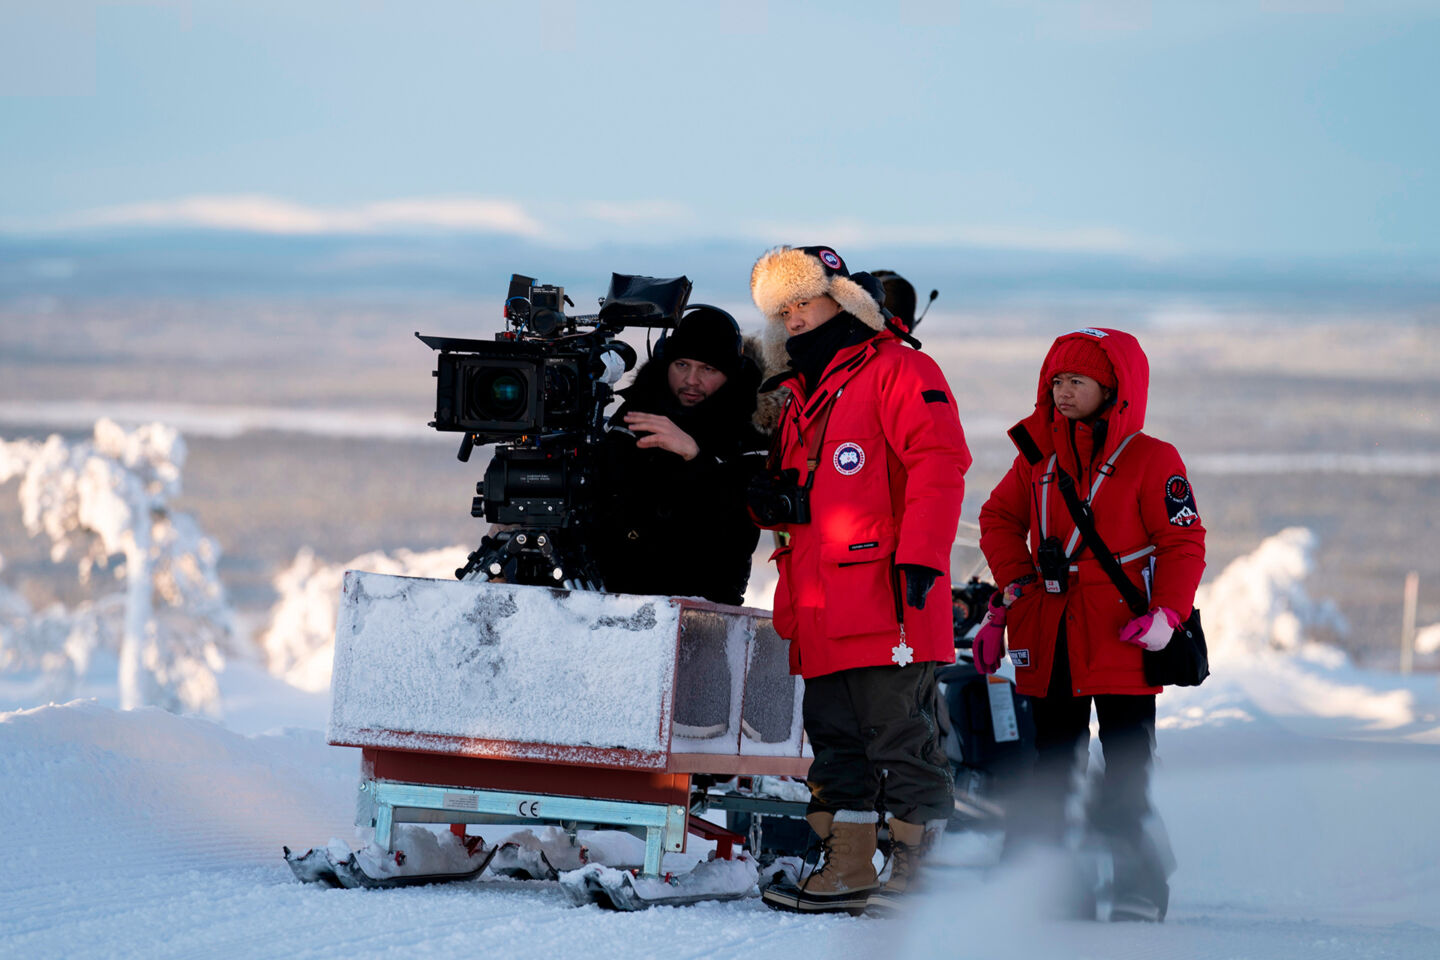 Making of I Remember, a Chinese romance film shot in Finnish Lapland